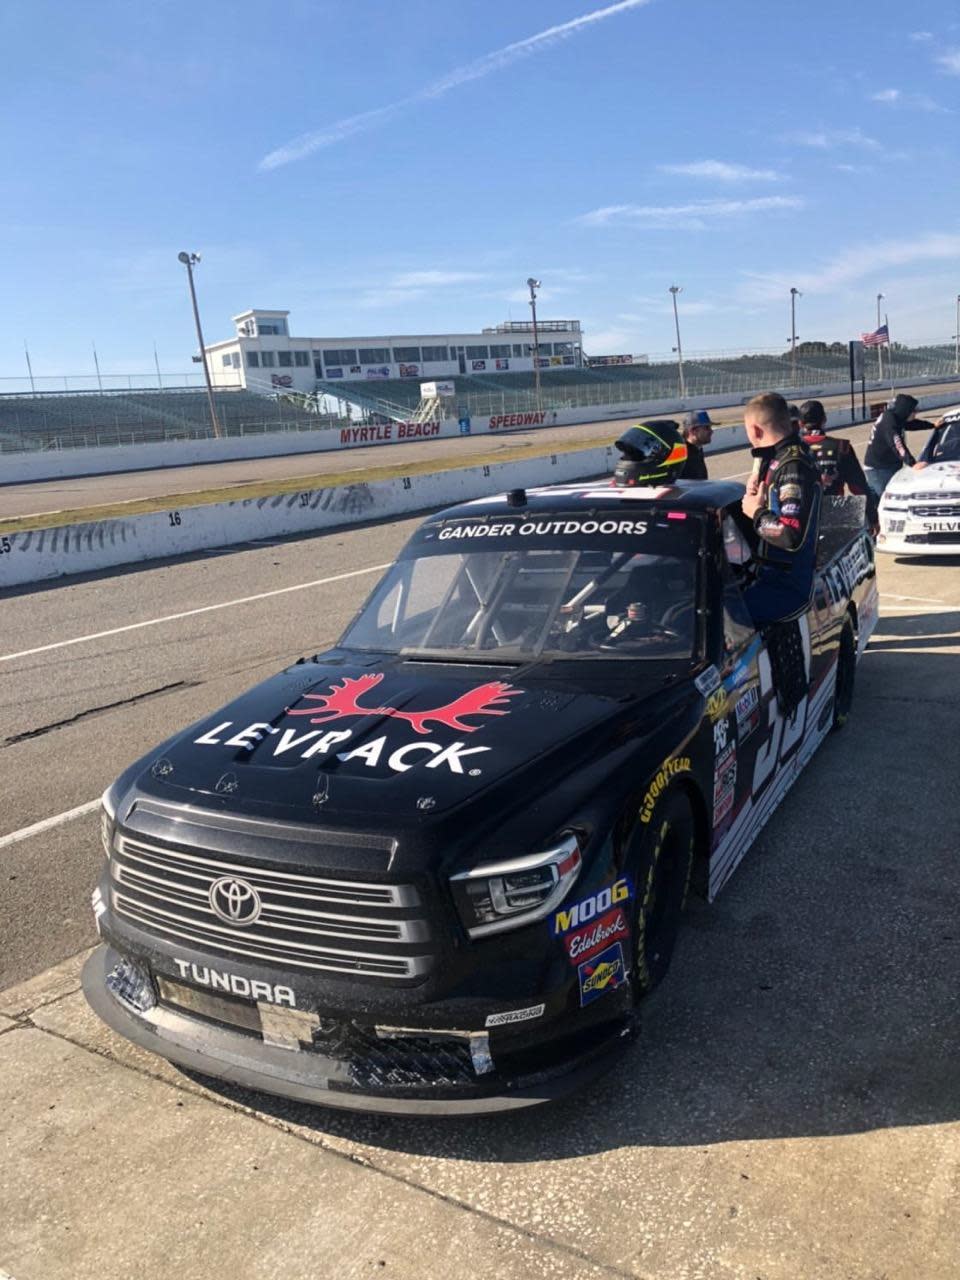 Devon Rouse of Burlington climbs into a NASCAR truck to turn a few laps in Charlotte, North Carolina.